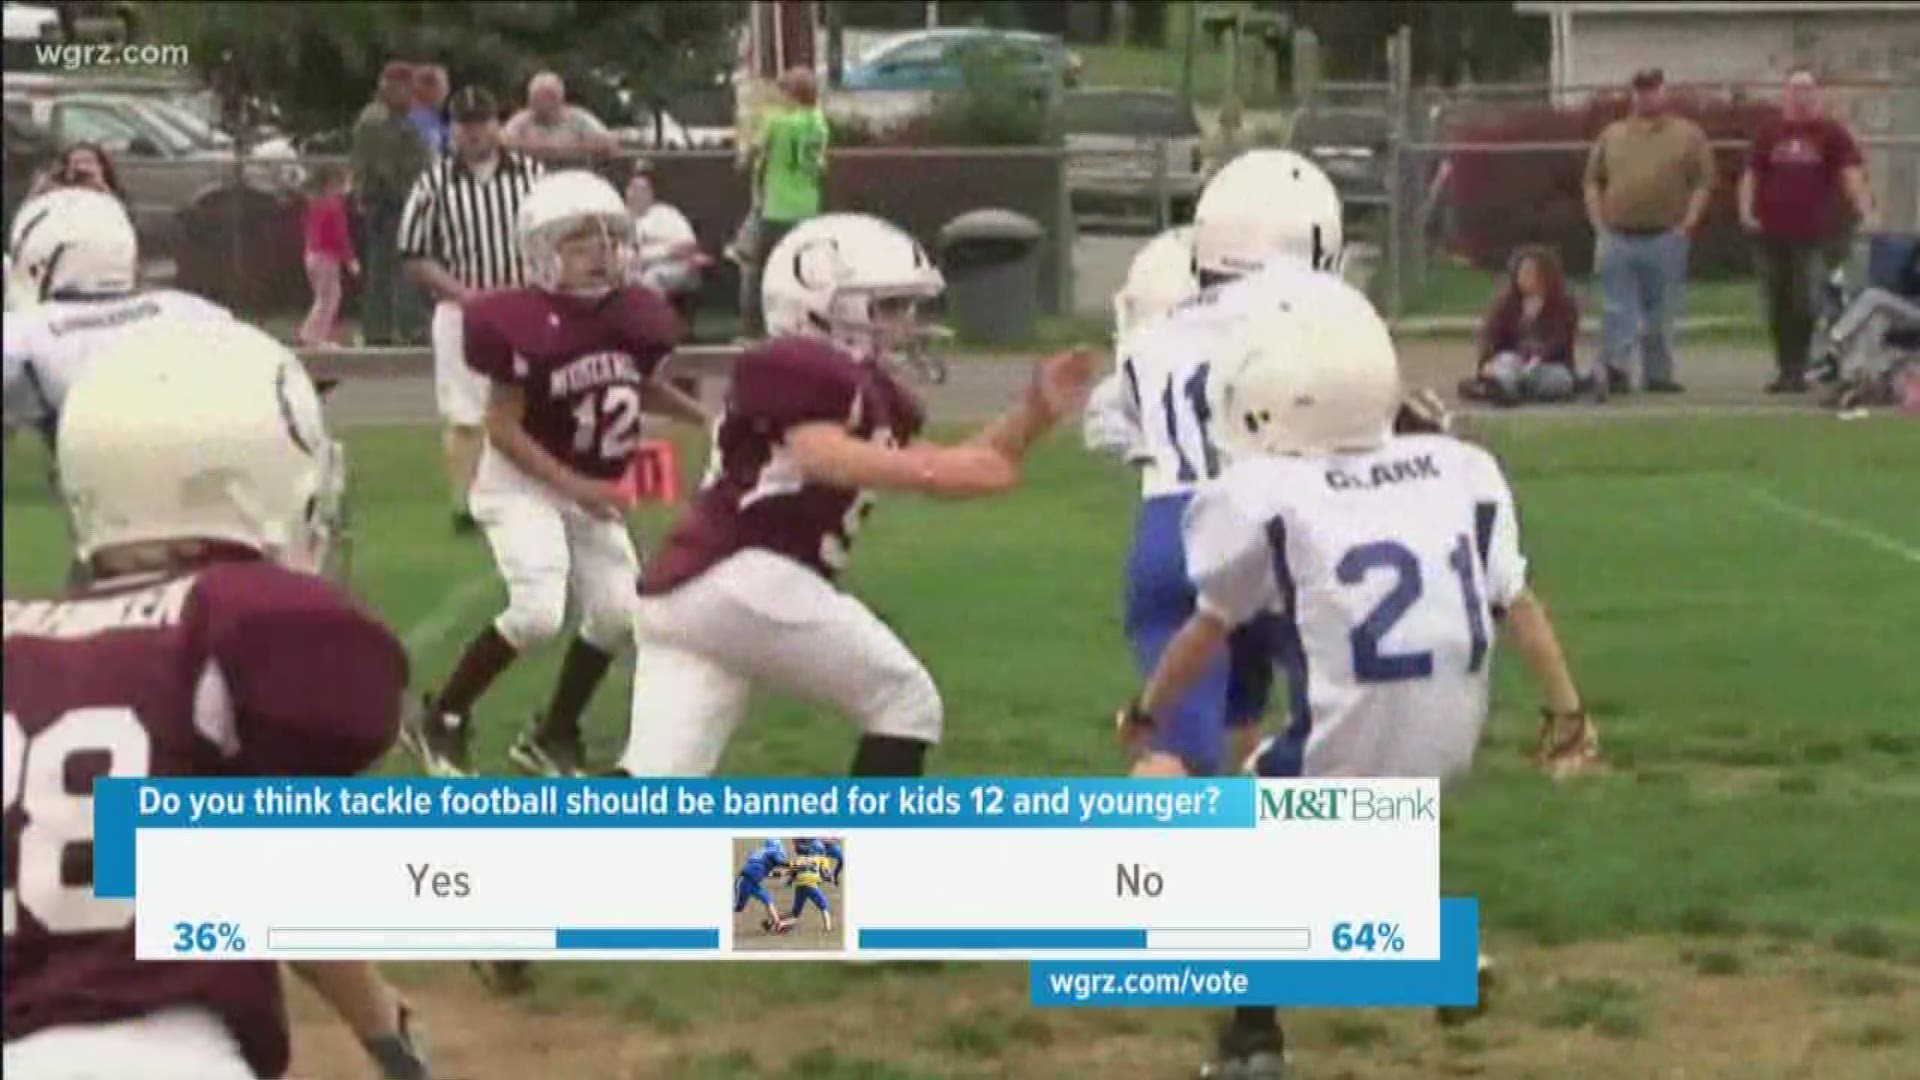 New York State lawmakers meet on tackle football ban